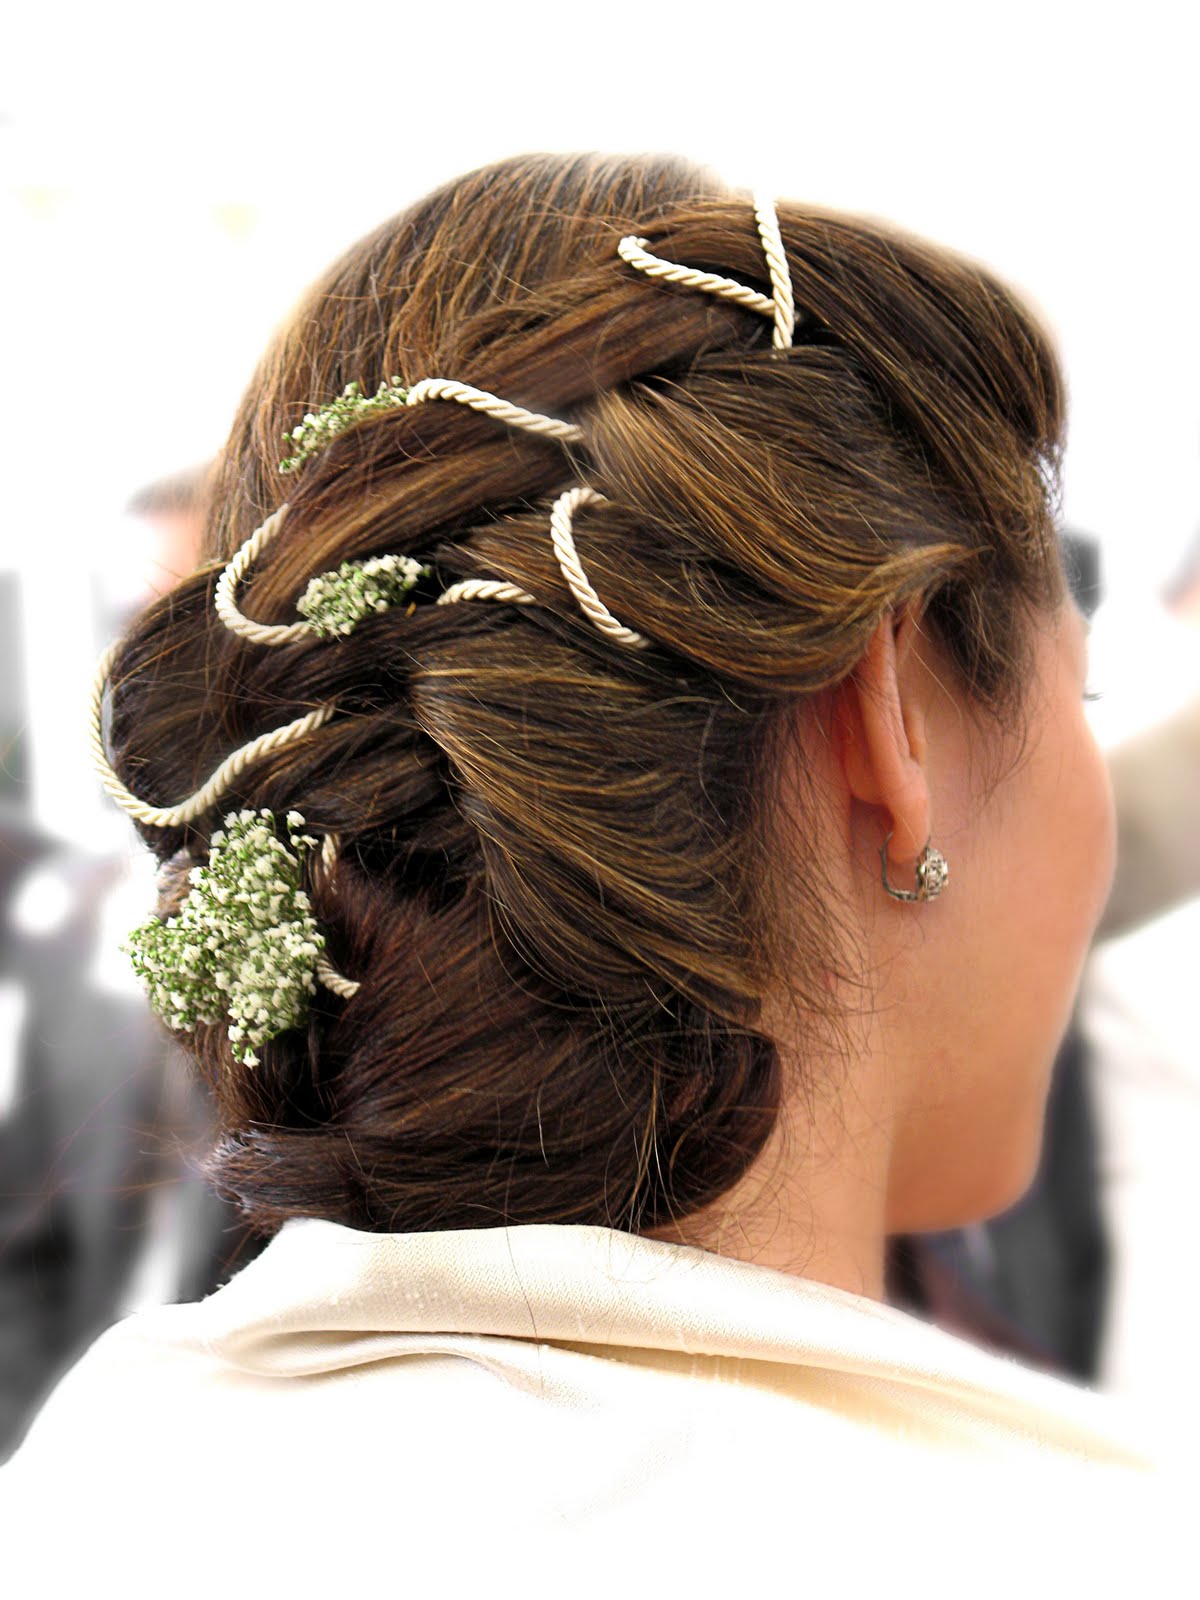 hairstyles popular 2012: Summer And Spring Wedding Hairstyle